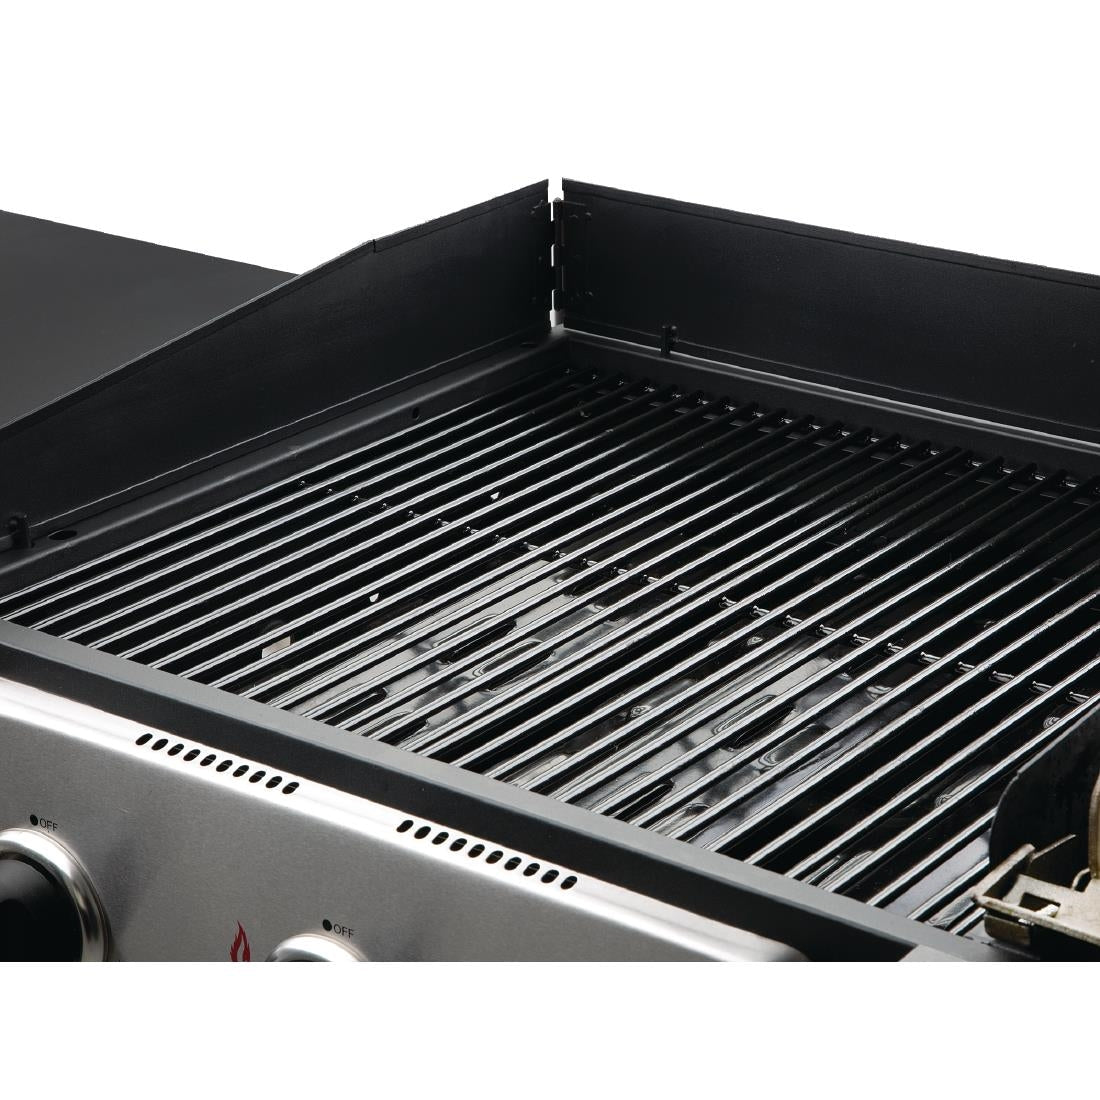 Buffalo 6 Burner Combi BBQ Grill and Griddle CP240 JD Catering Equipment Solutions Ltd